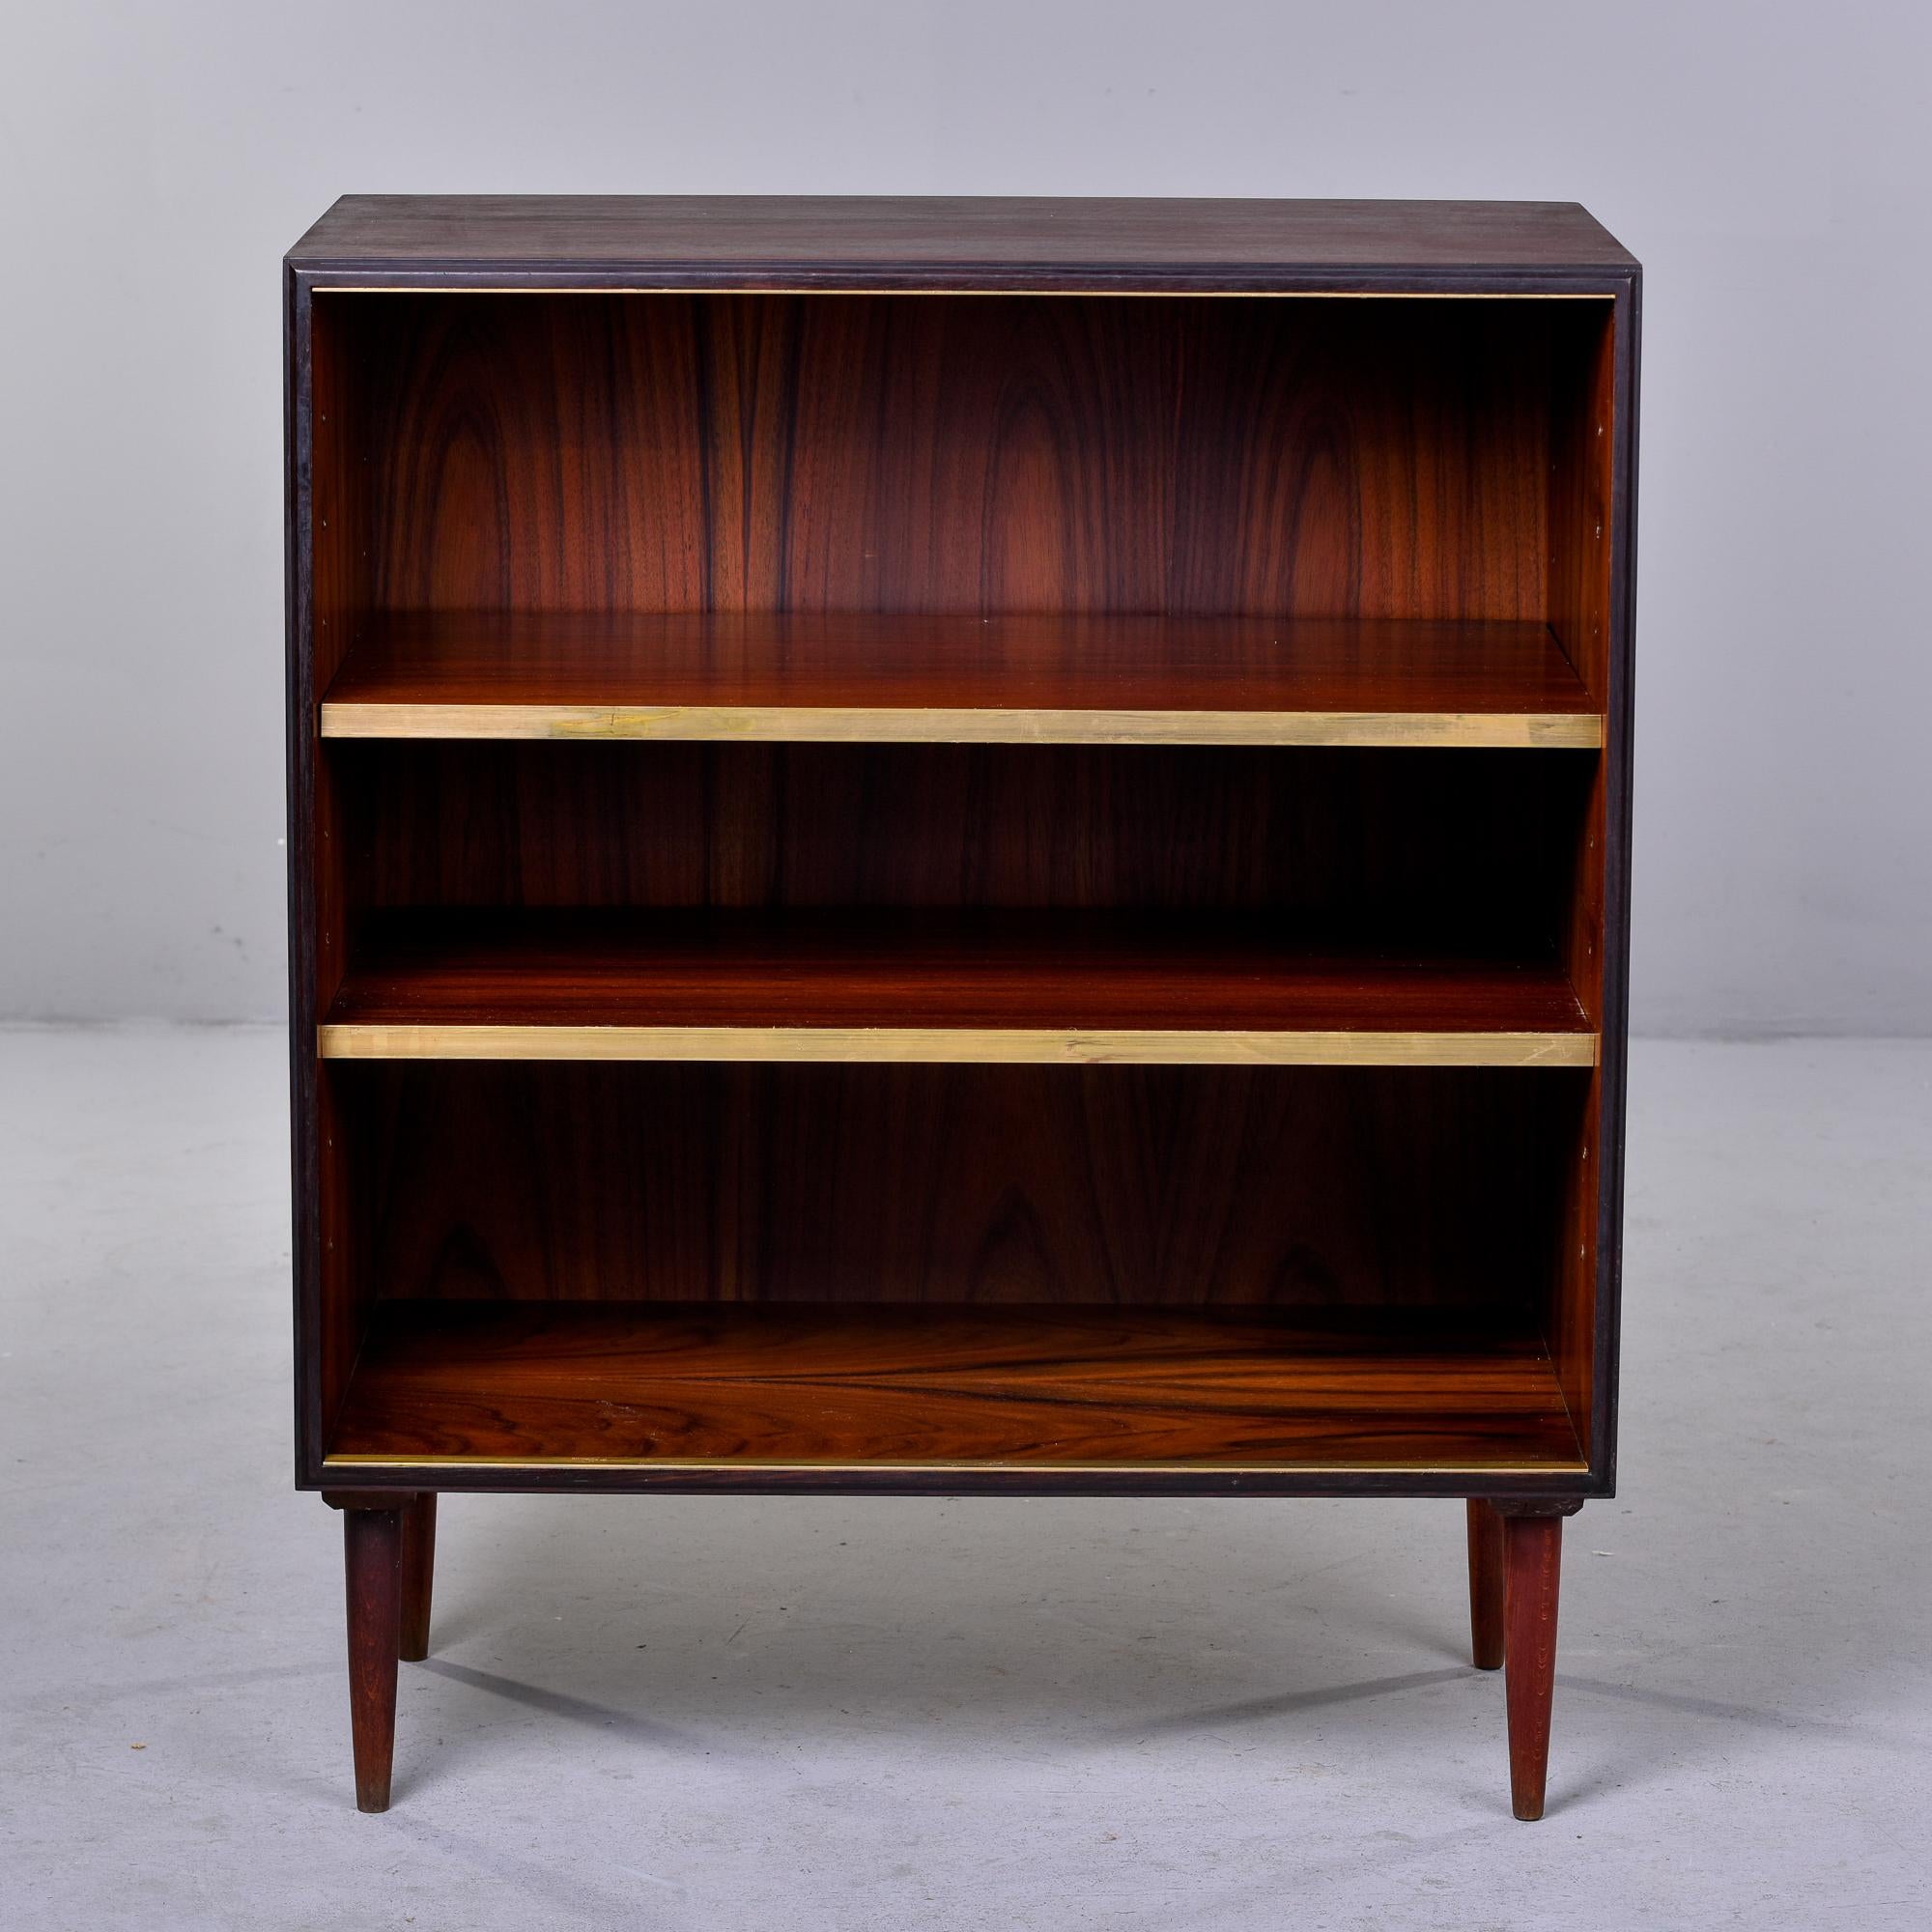 Found in Italy, this circa 1960s small standing shelf unit is made of mahogany and features two adjustable shelves with brass trim on the front-facing edge. Tapered legs and dark stained wood. At the time of this posting, we have three available.